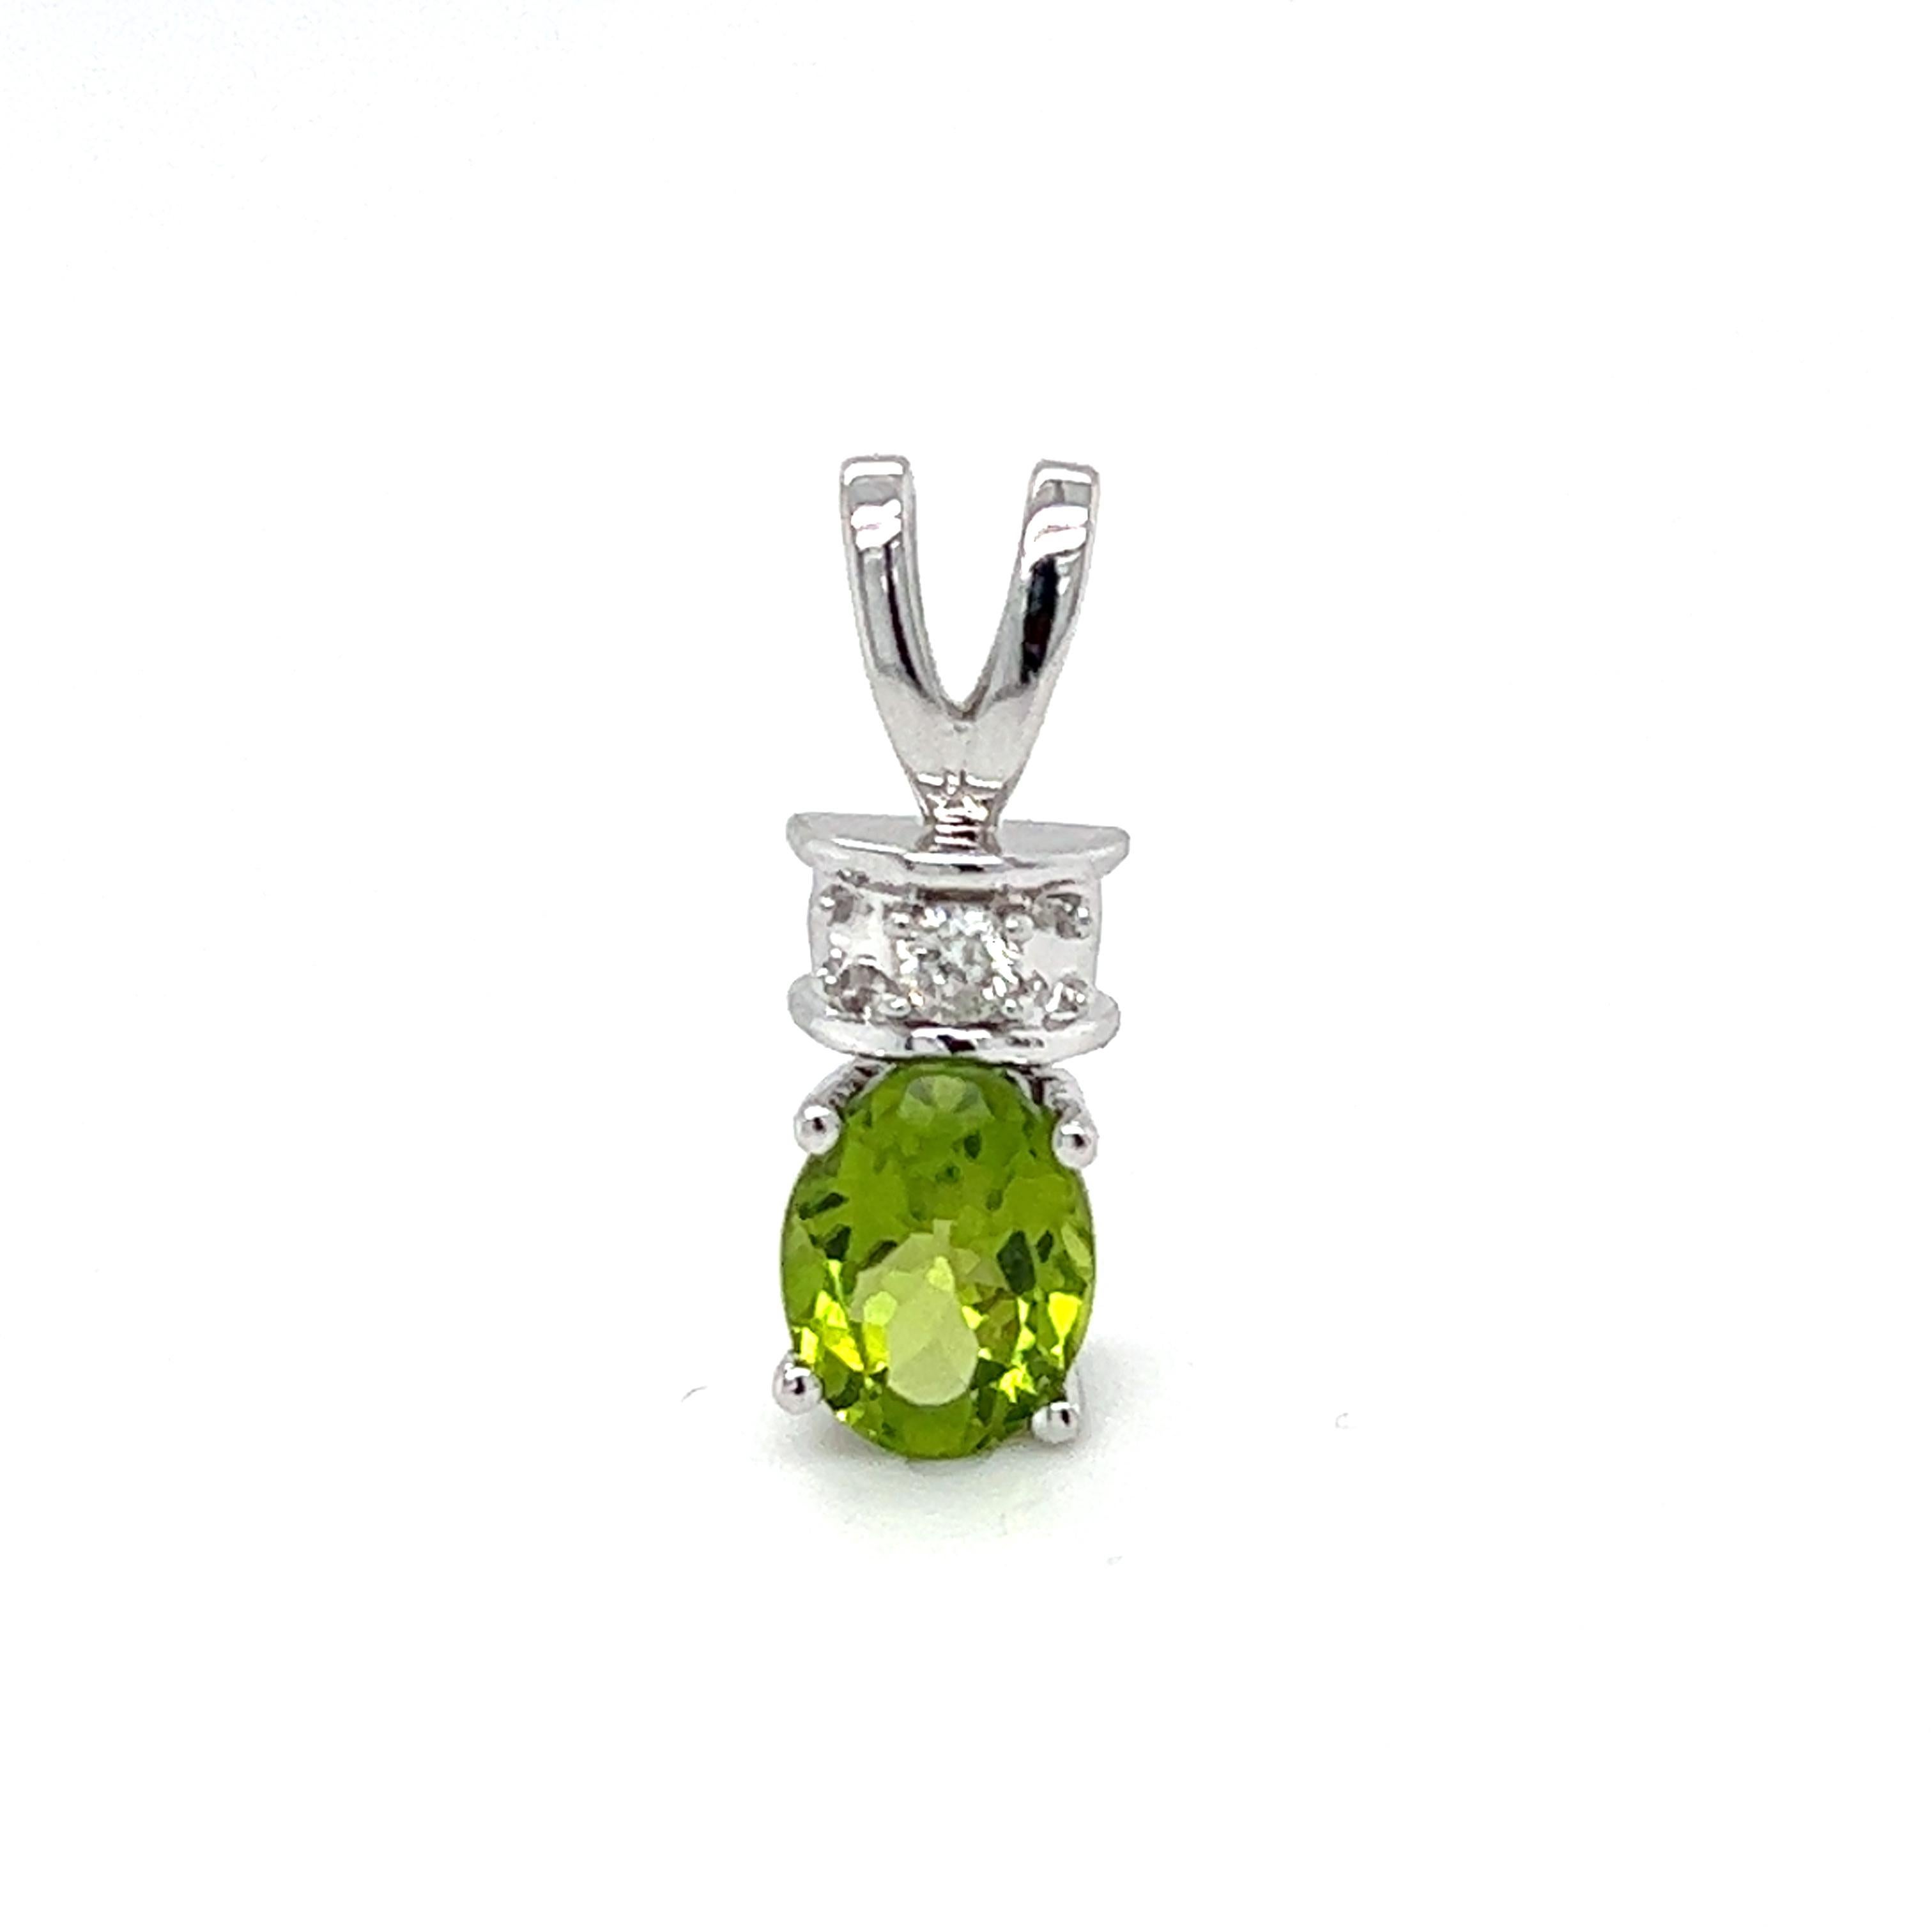 One 14 karat white gold pendant set with one 9x7mm oval green peridot and 0.10 carat total weight of brilliant cut diamonds with matching H/I color and I1 clarity.  The pendant measures 0.80